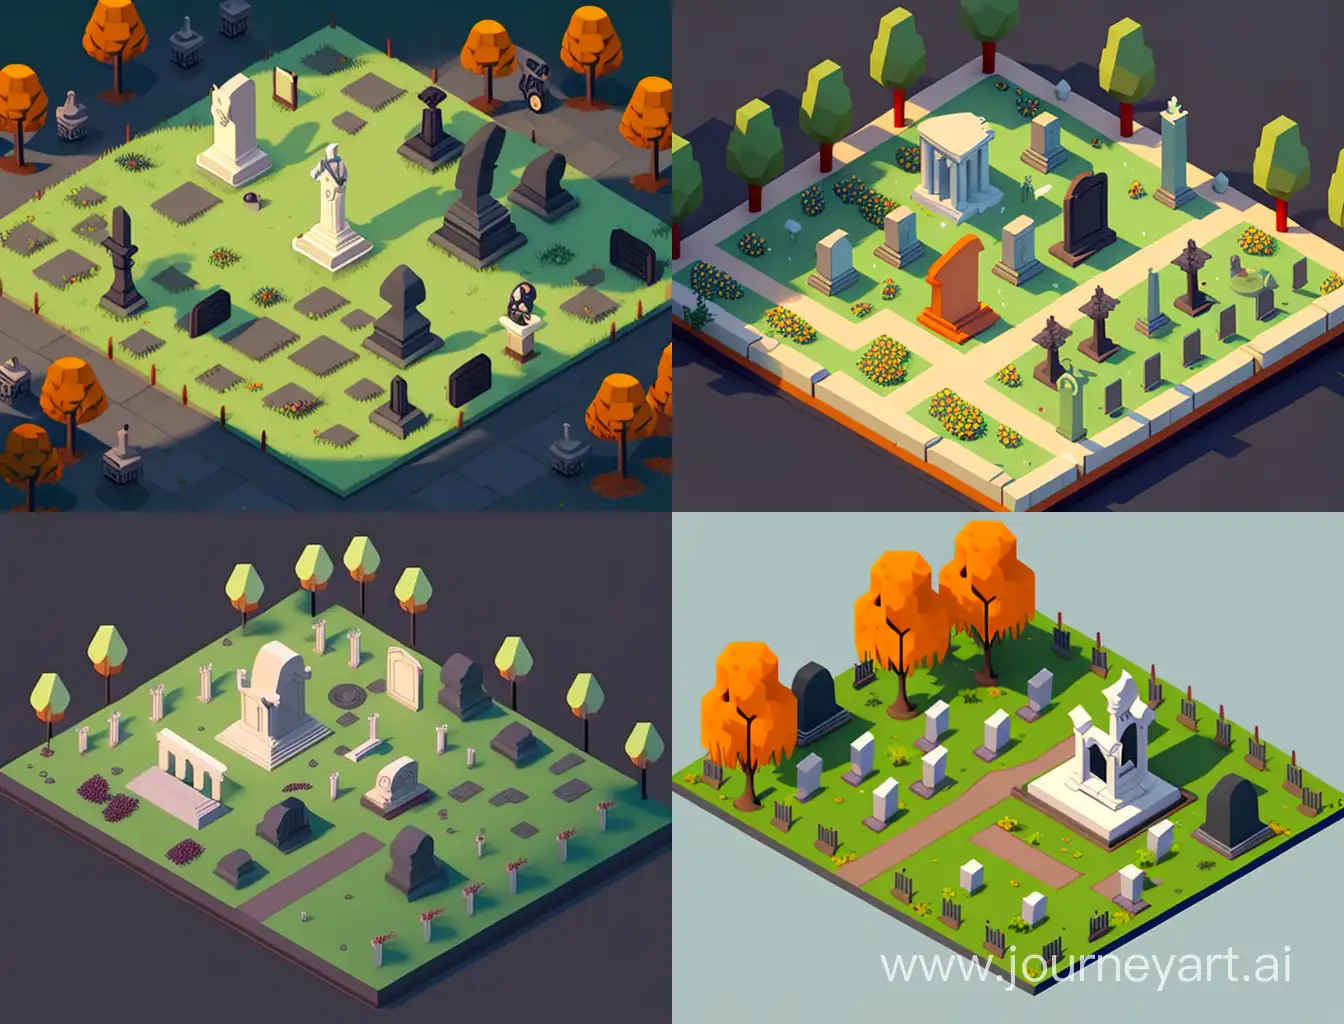 Casual-Isometric-Cemetery-Scene-with-a-Vintage-Vibe